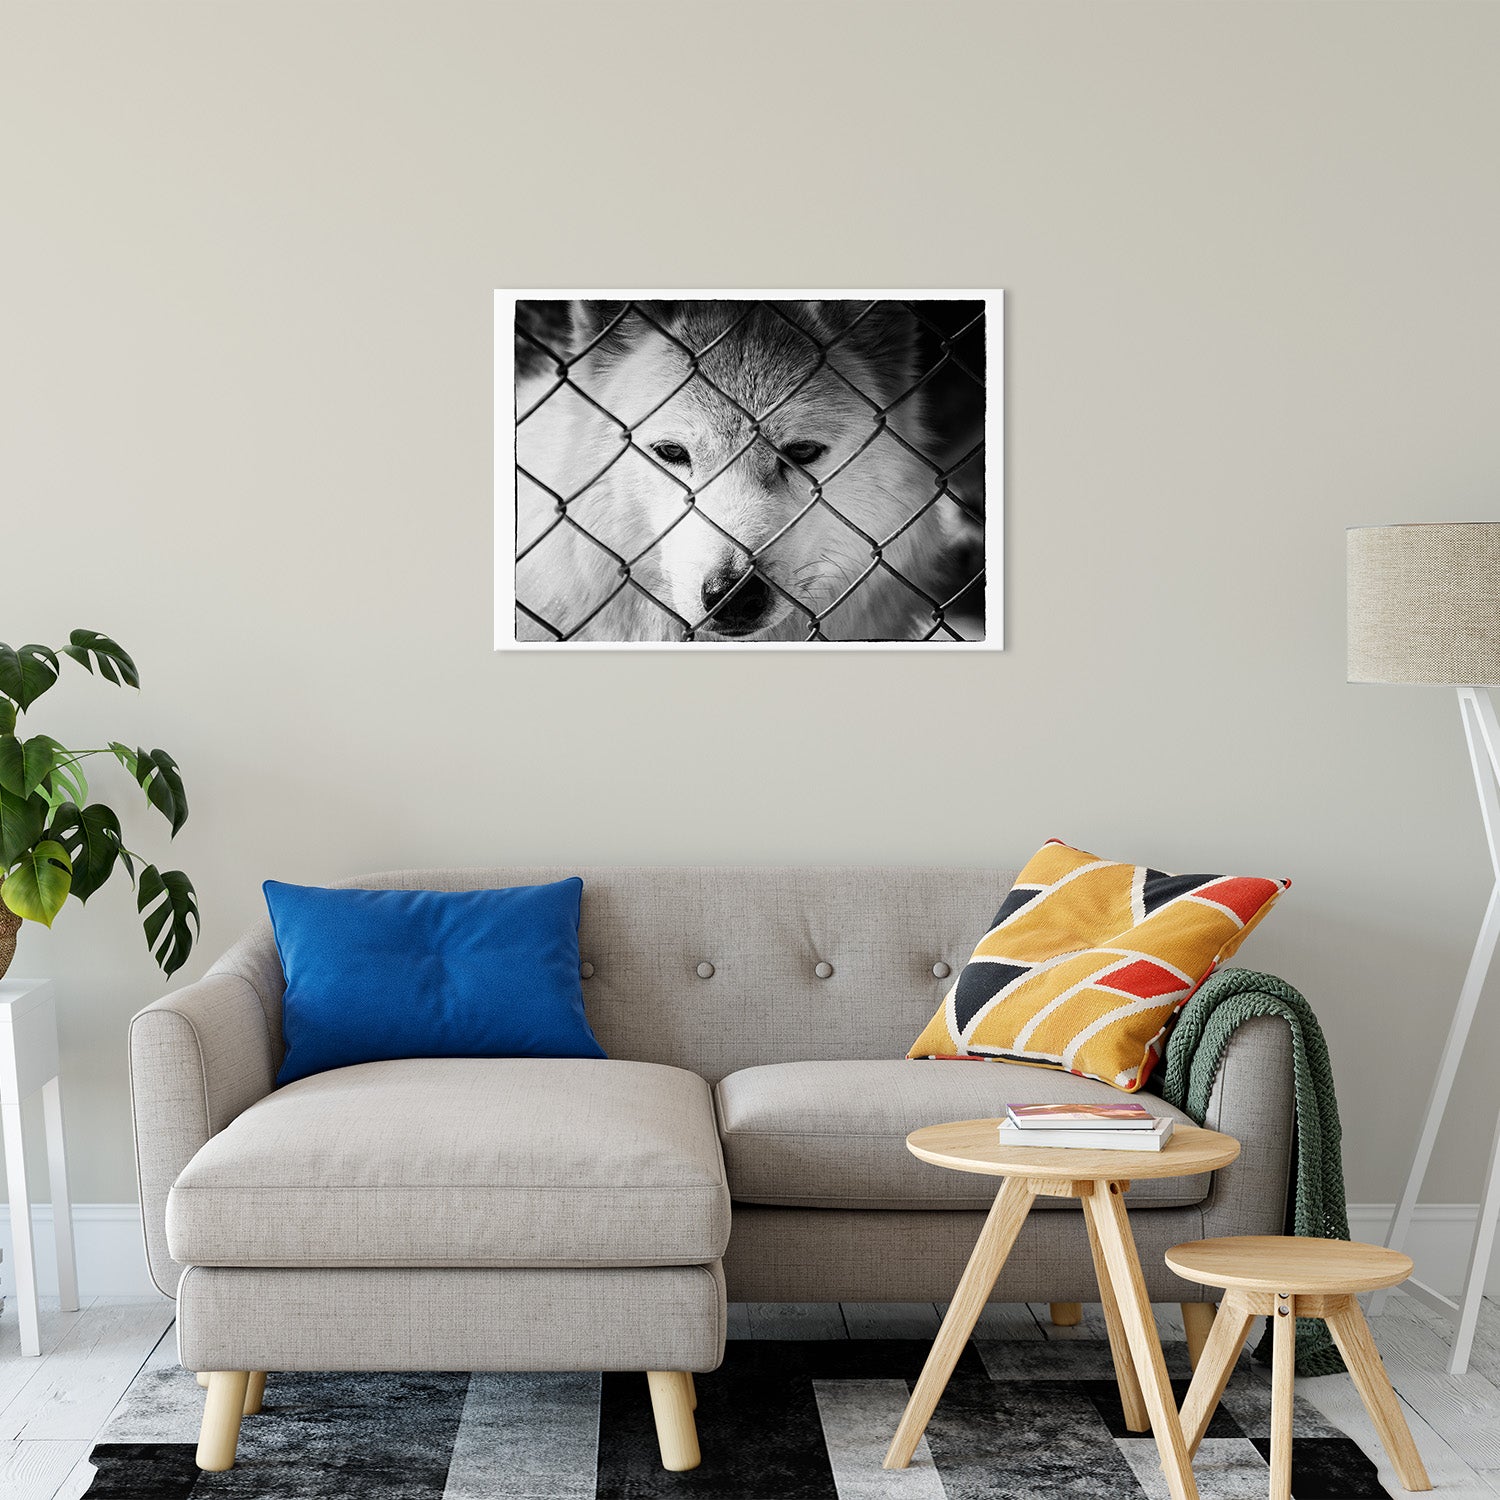 Dreams of Freedom in Black and White Animal / Wildlife Photograph Fine Art Canvas & Unframed Wall Art Prints 24" x 36" / Canvas Fine Art - PIPAFINEART